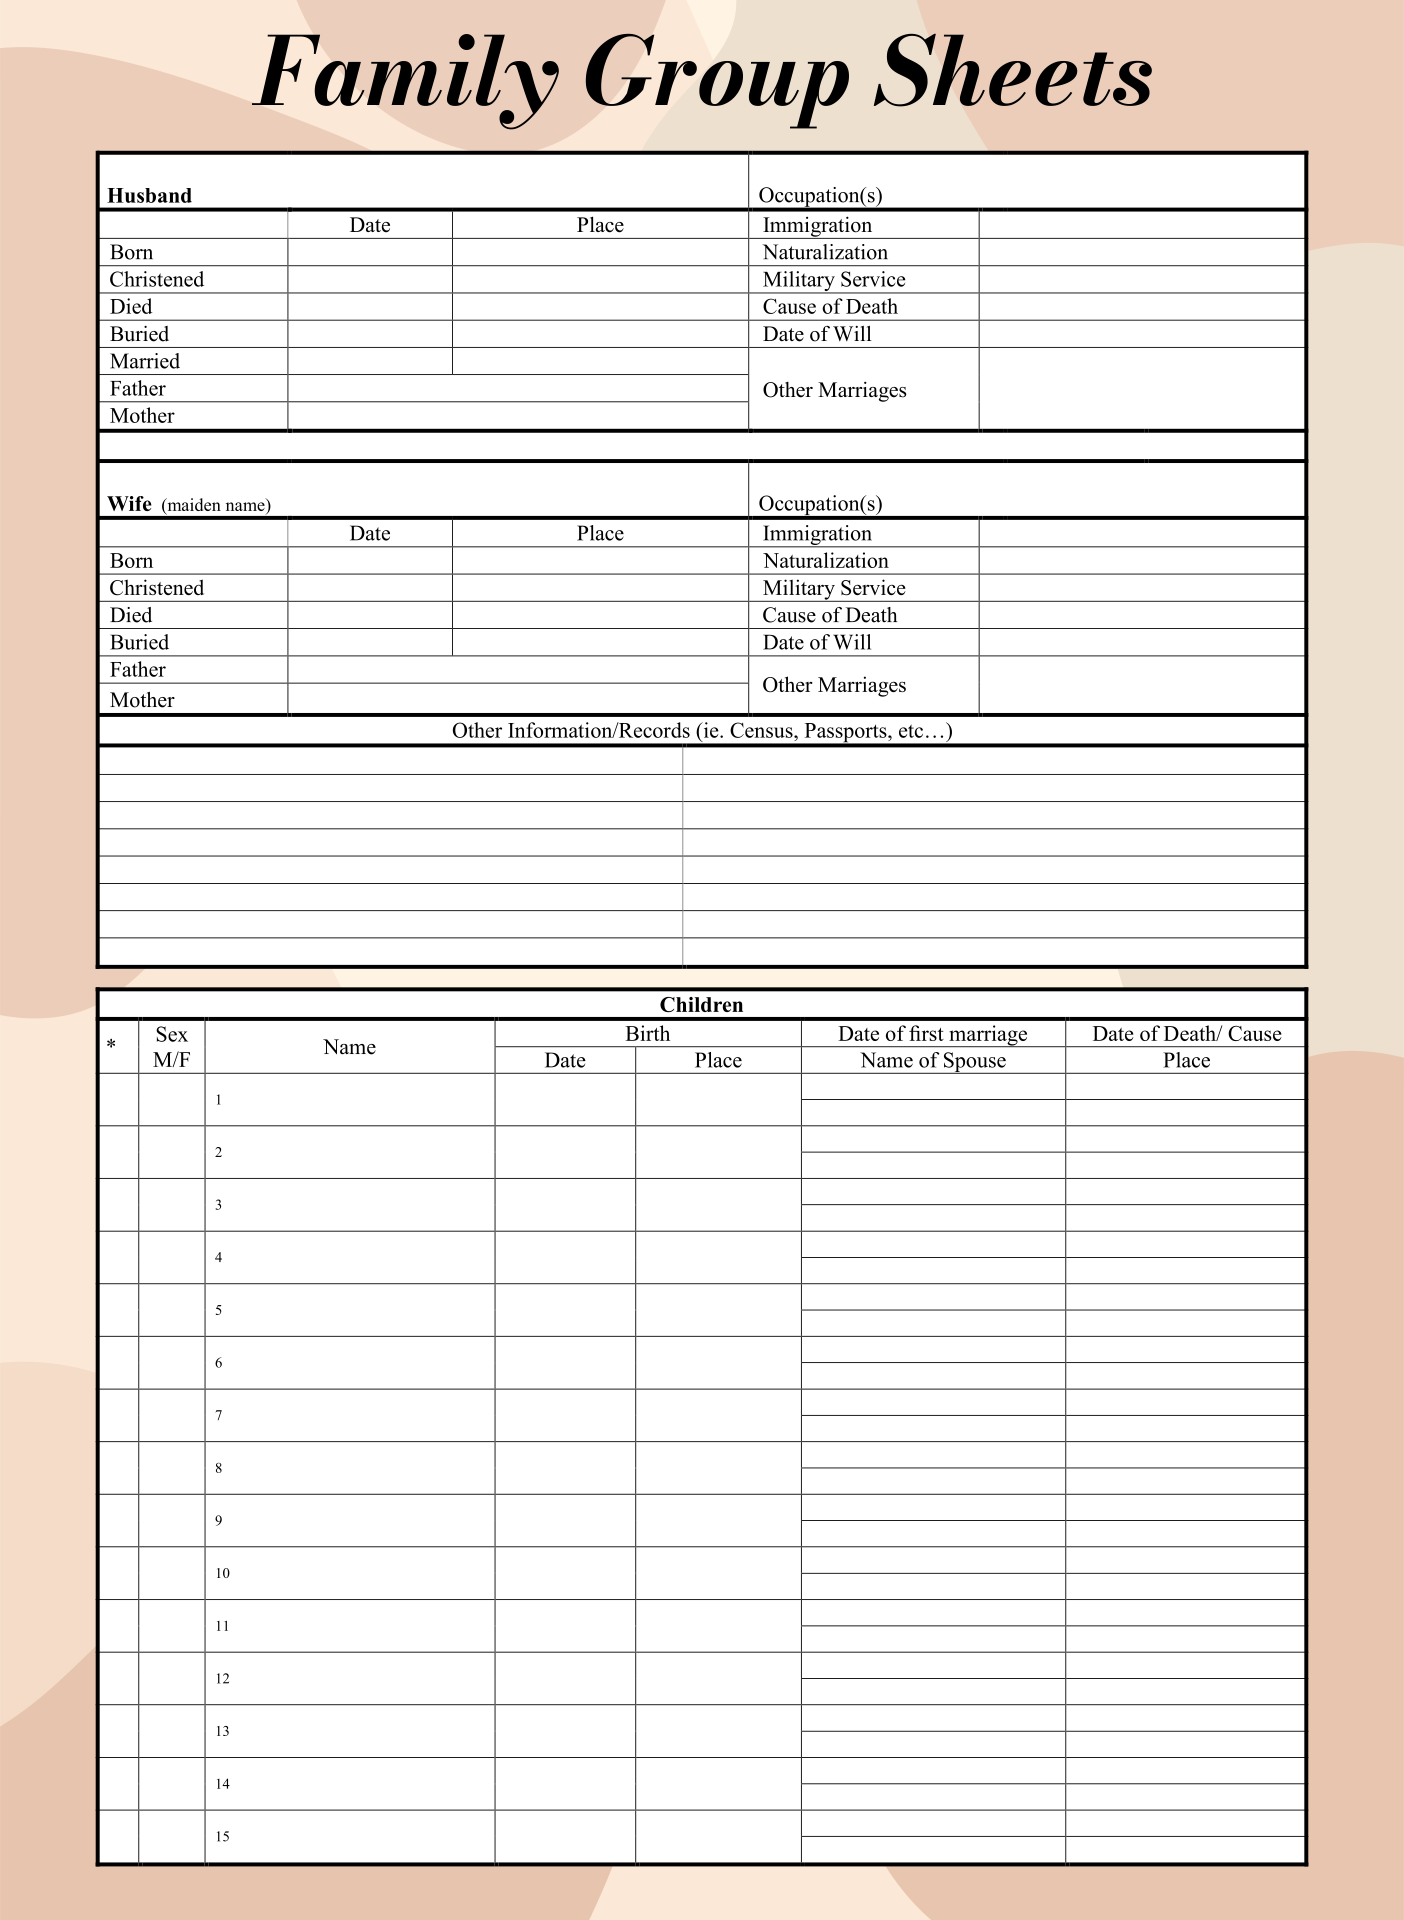 Blank Family Group Sheets